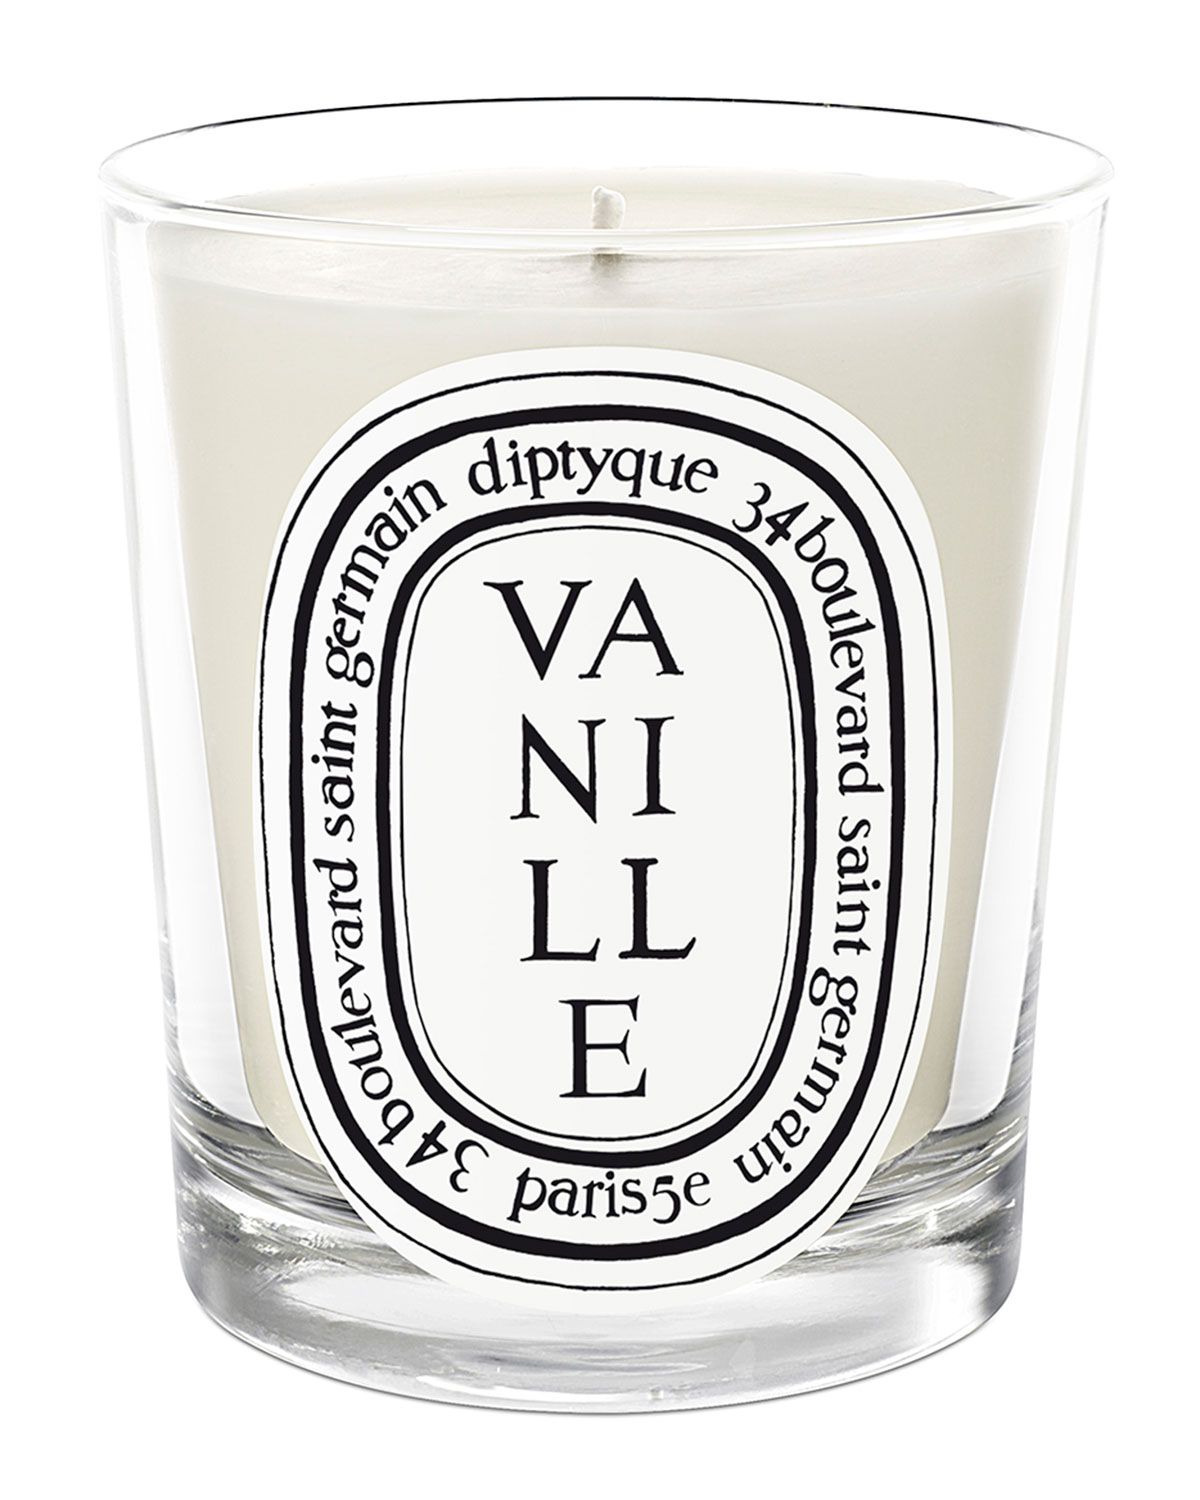 Vanille Scented Candle